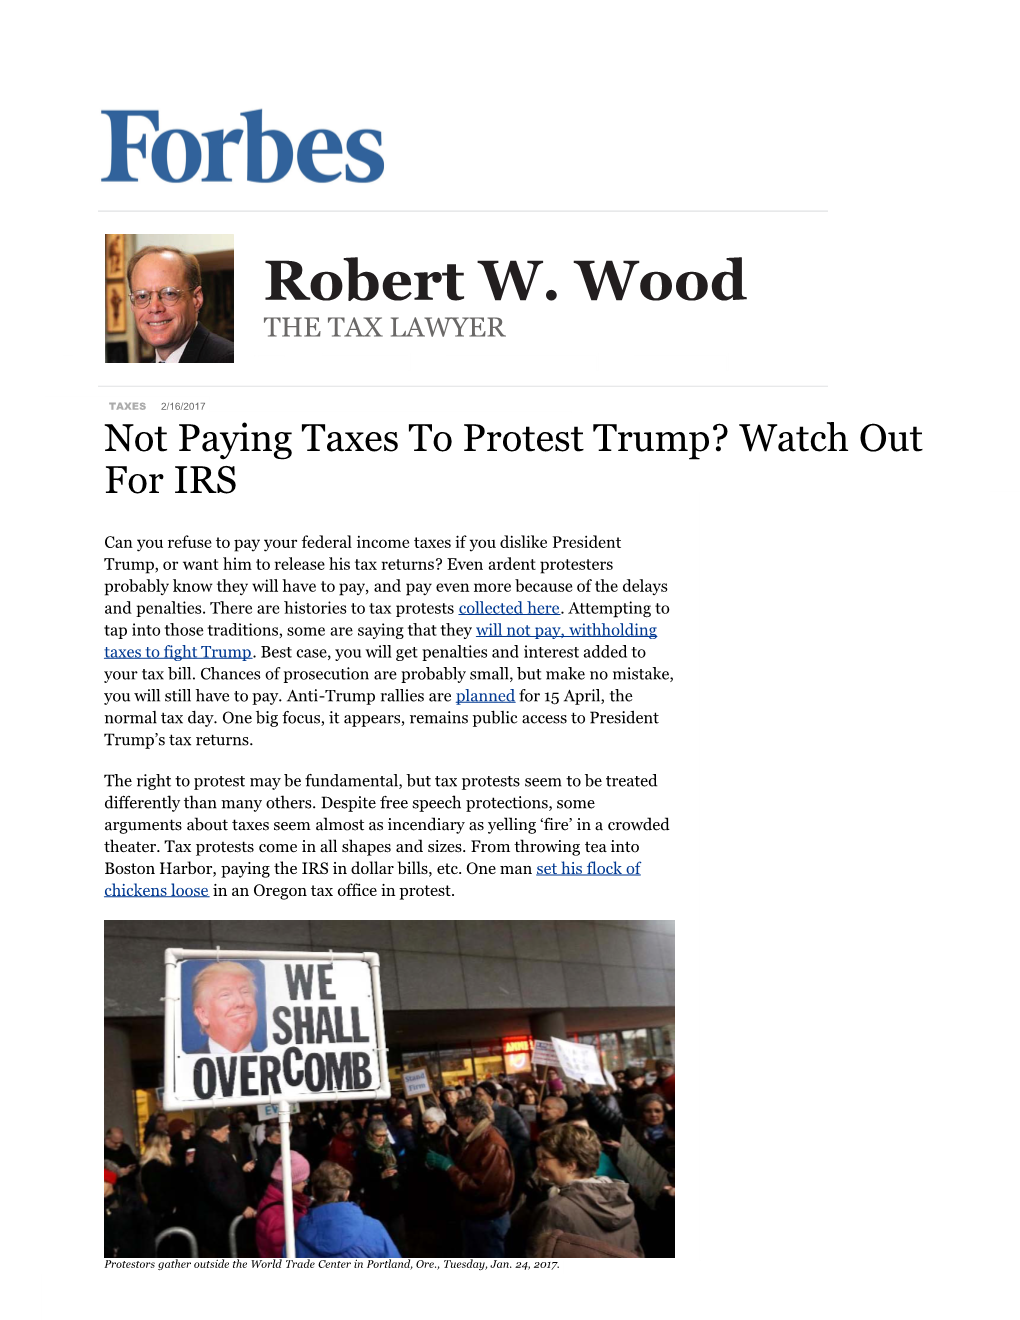 Not Paying Taxes to Protest Trump? Watch out for IRS